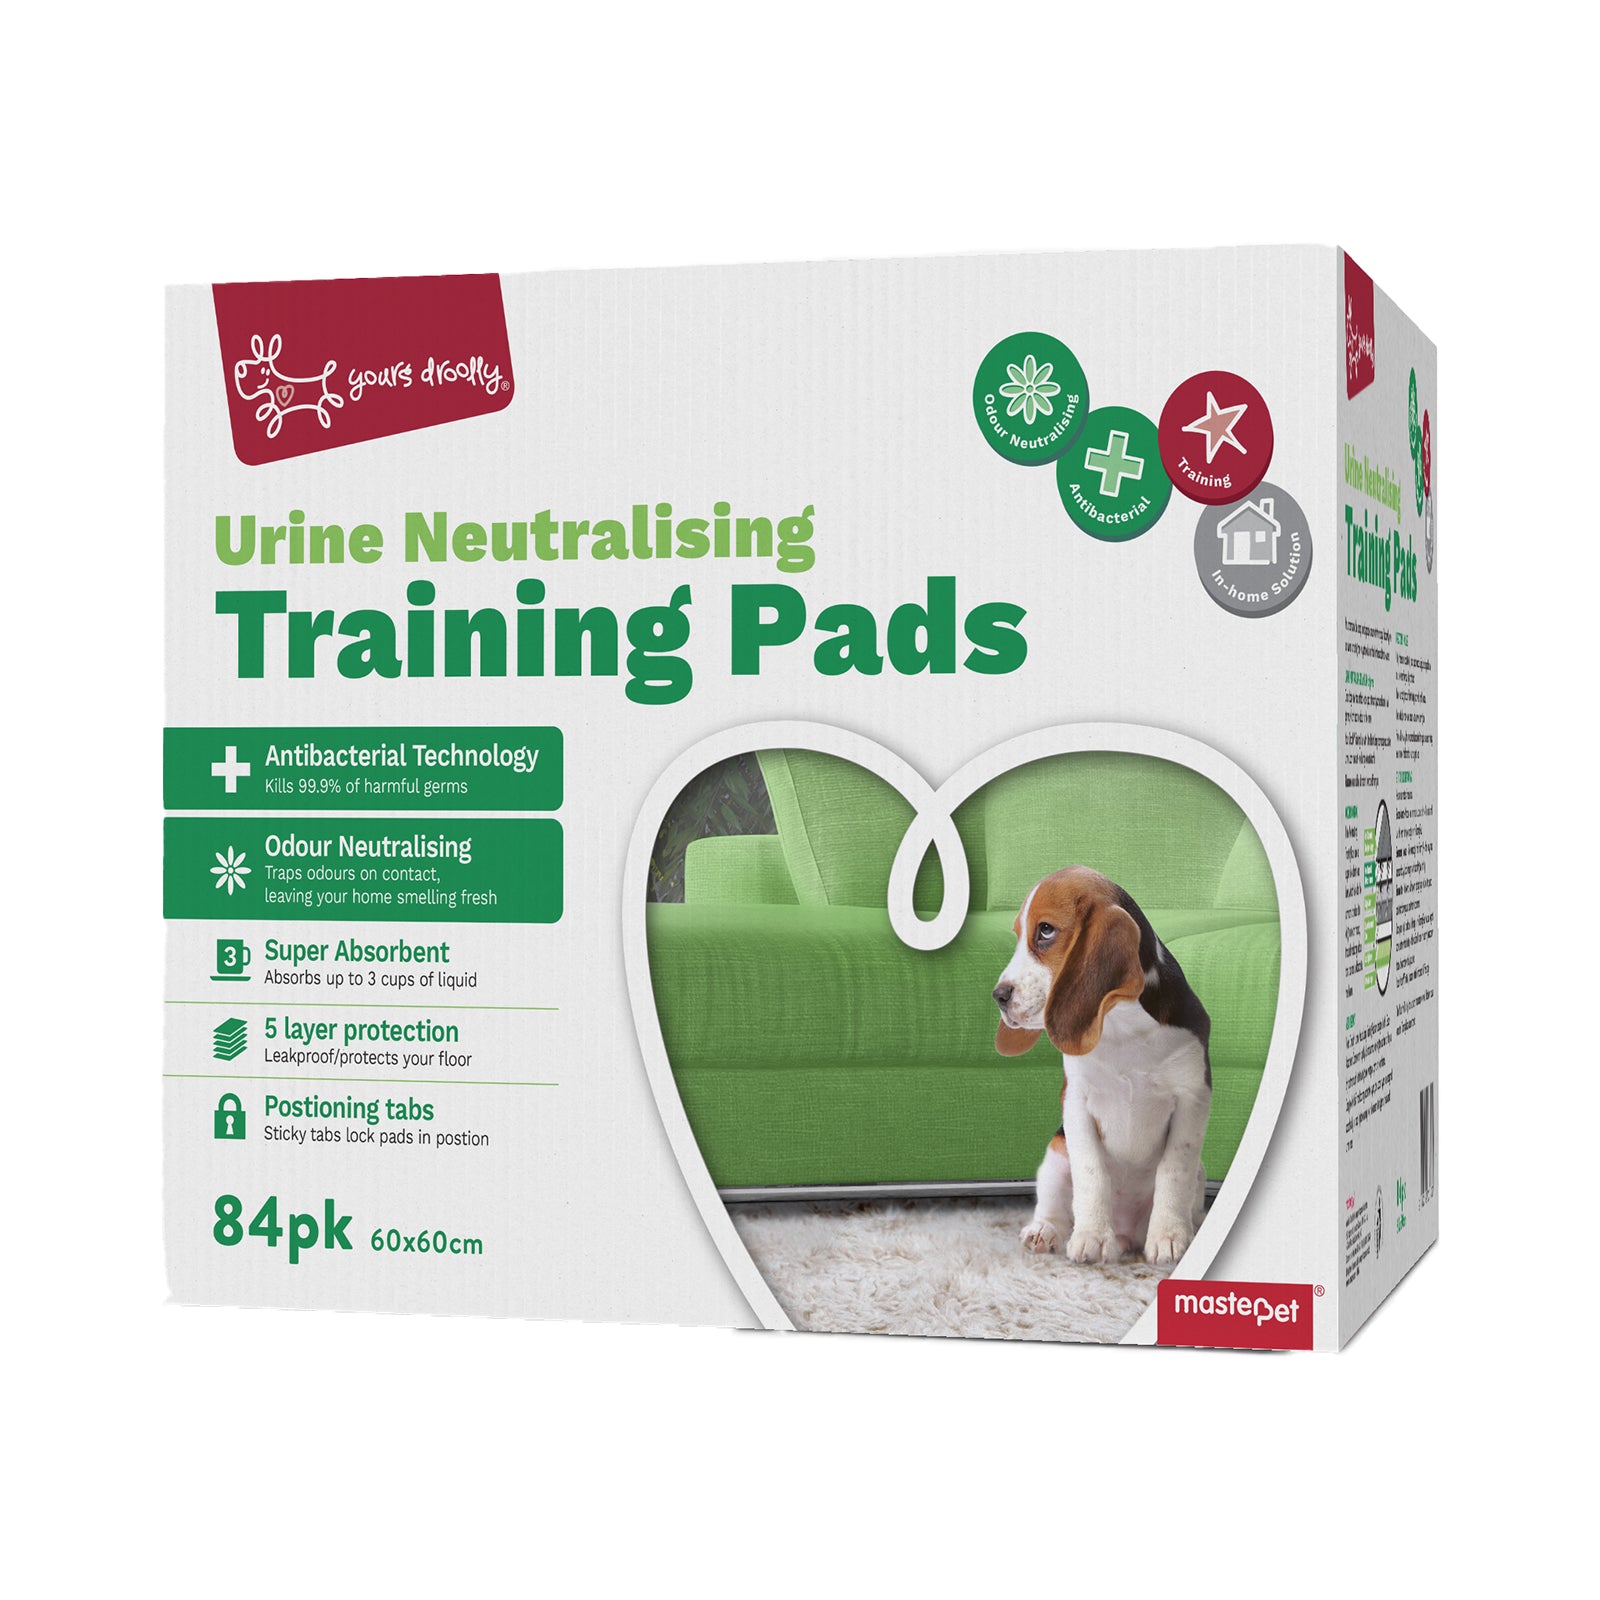 Yours Droolly Training Pads Urine Neutralising